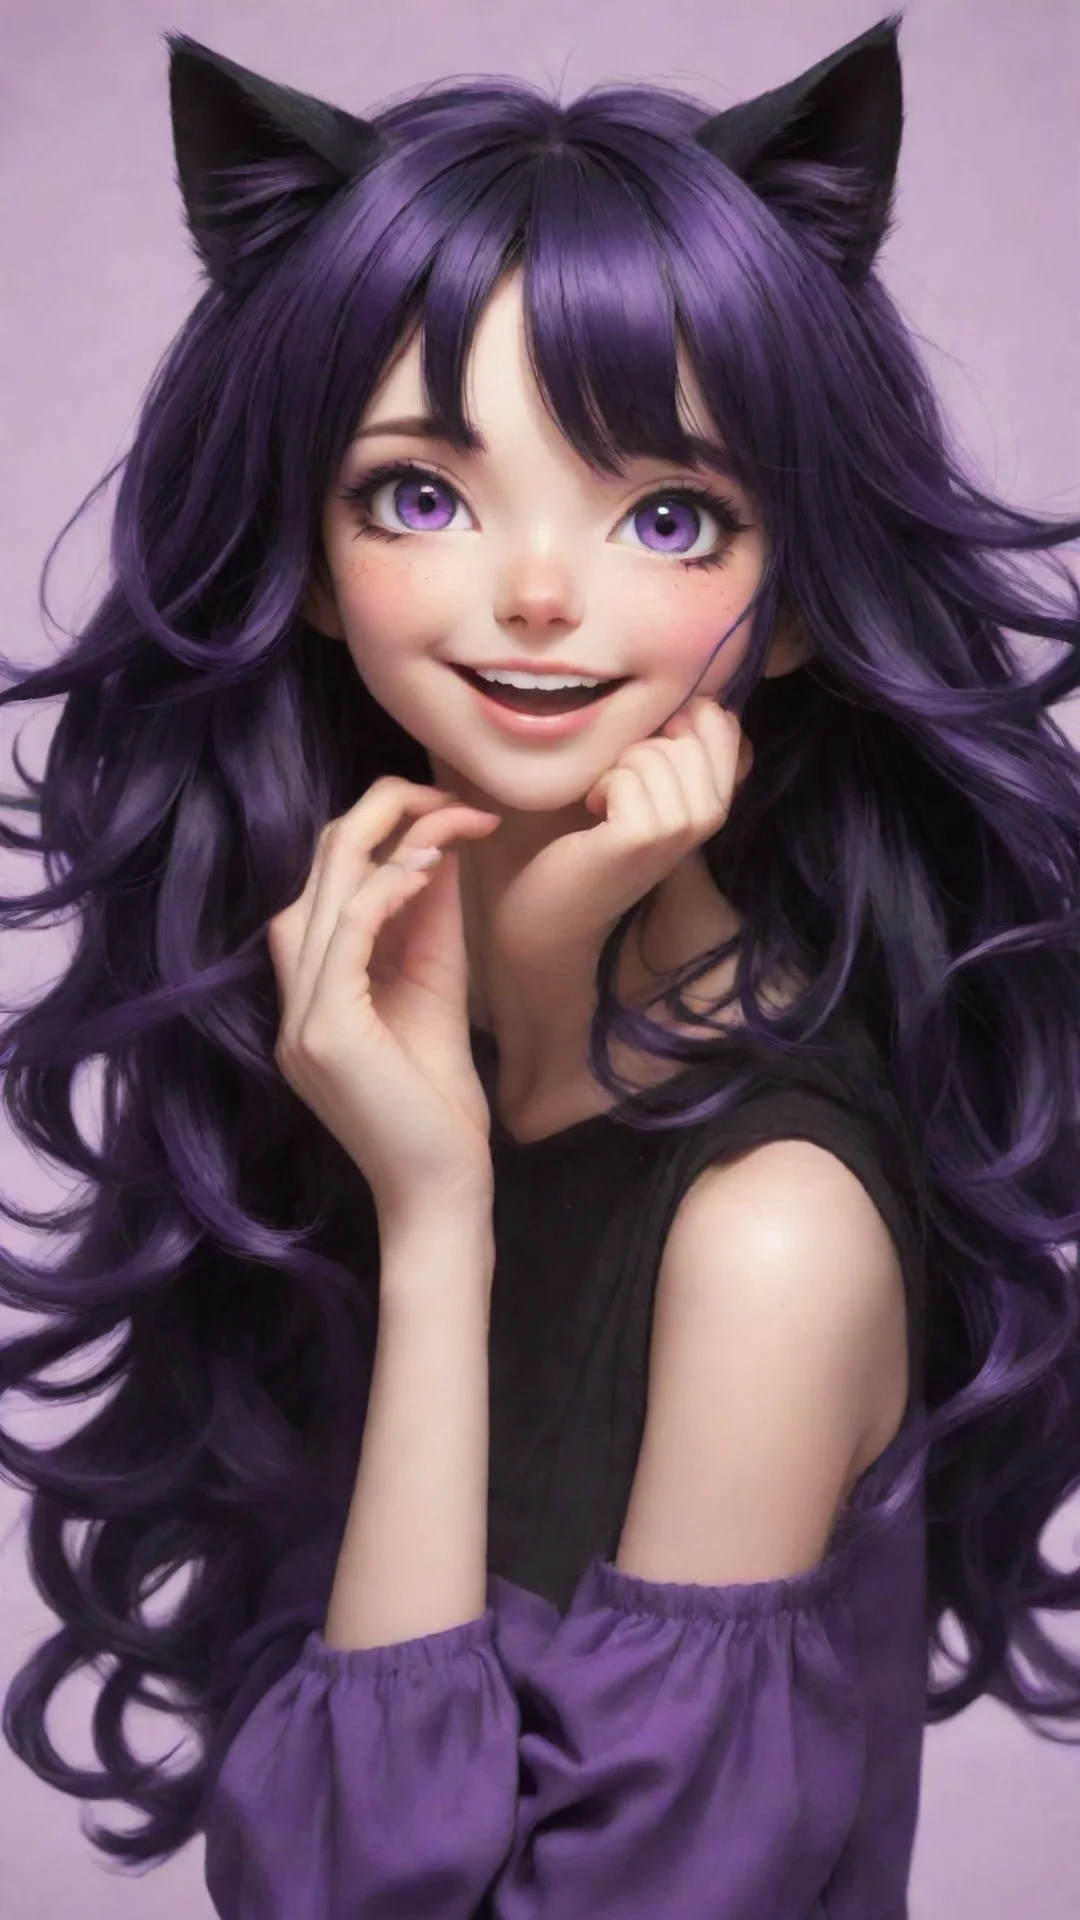 aiartstation art cat girl with black purplish hair and is joyful confident engaging wow 3 tall